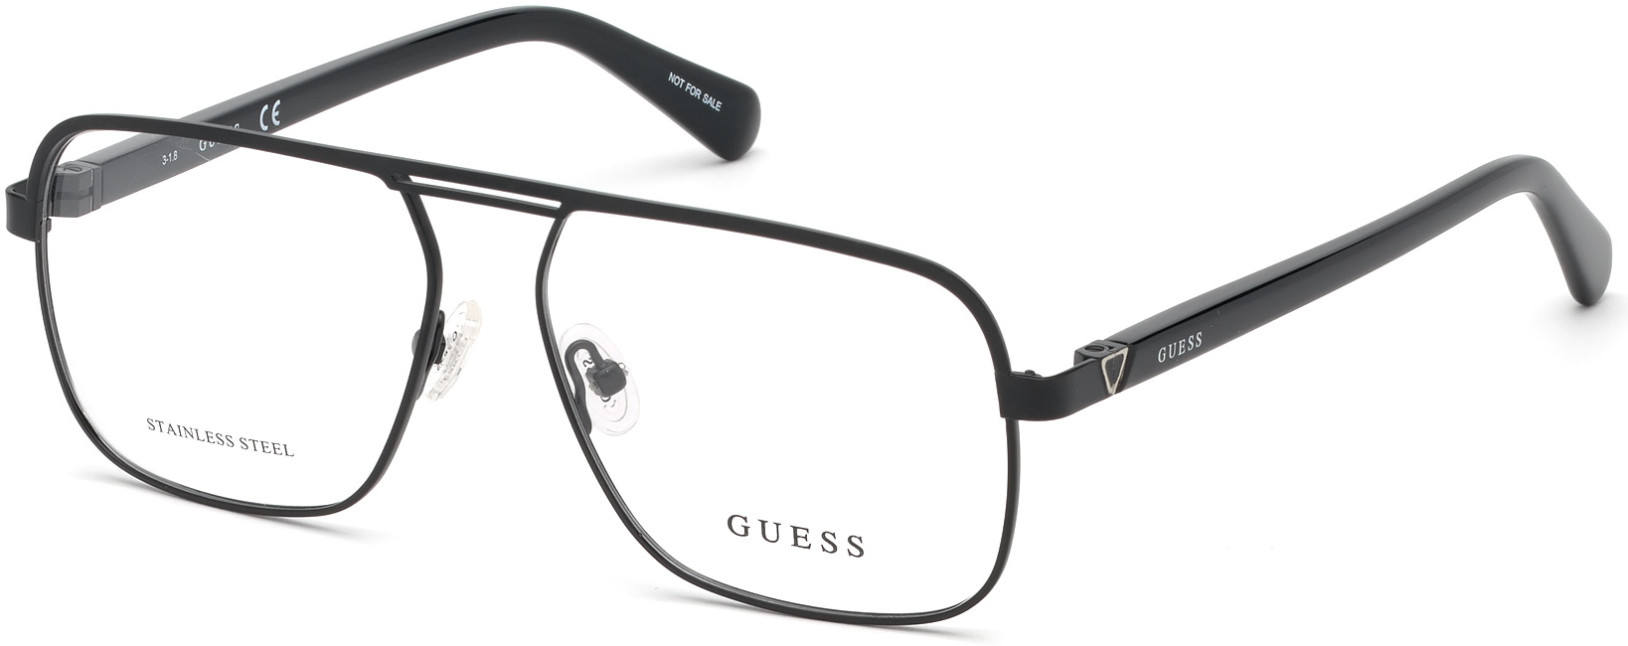 GUESS 1966 005